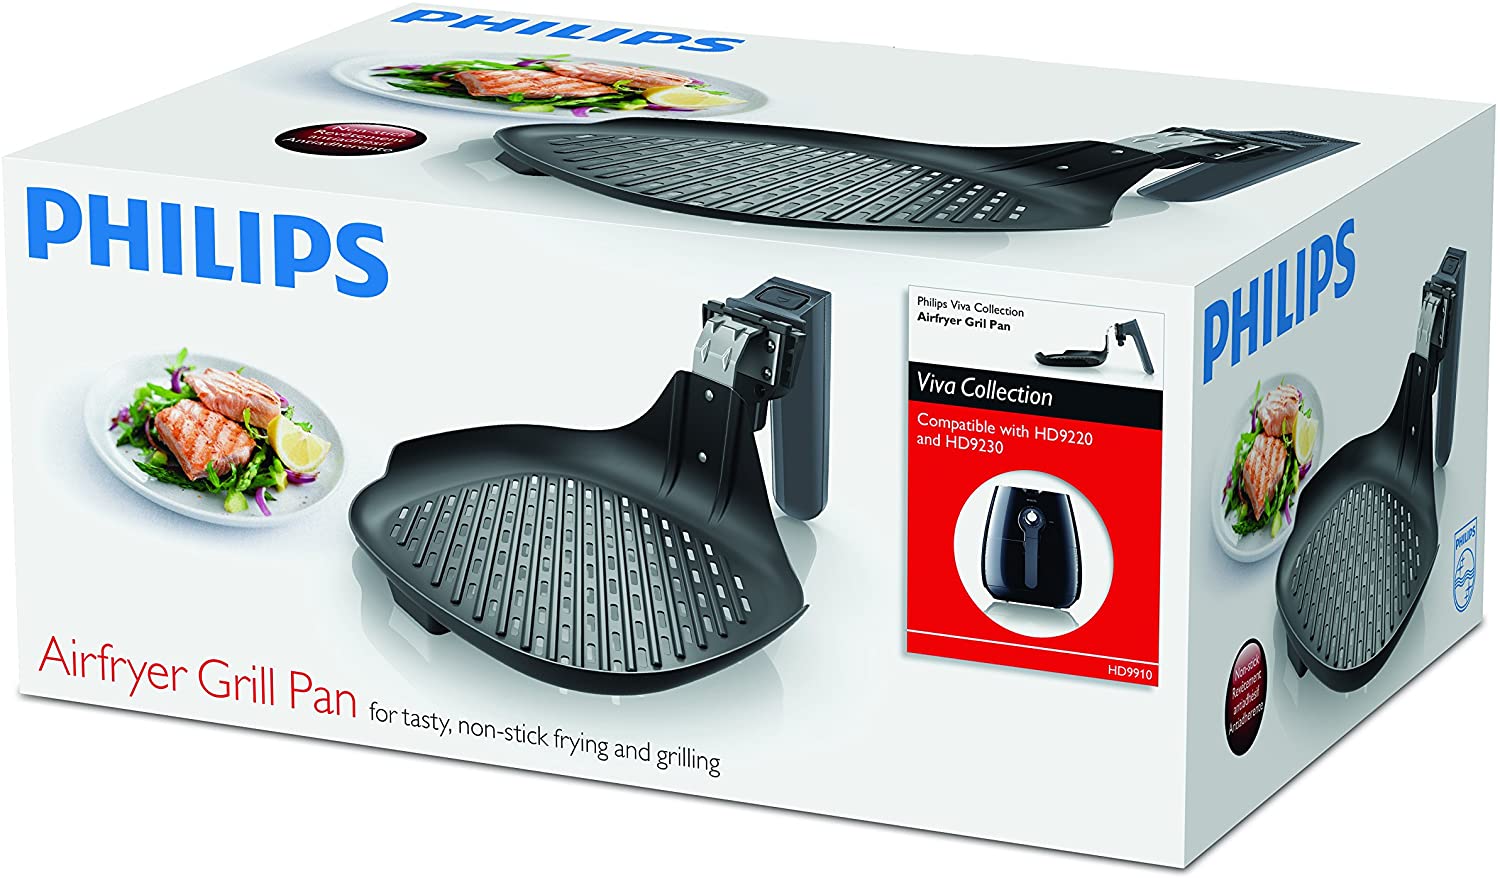 Philips HD9910/21 Fry Grill Pan $19.99 shipped